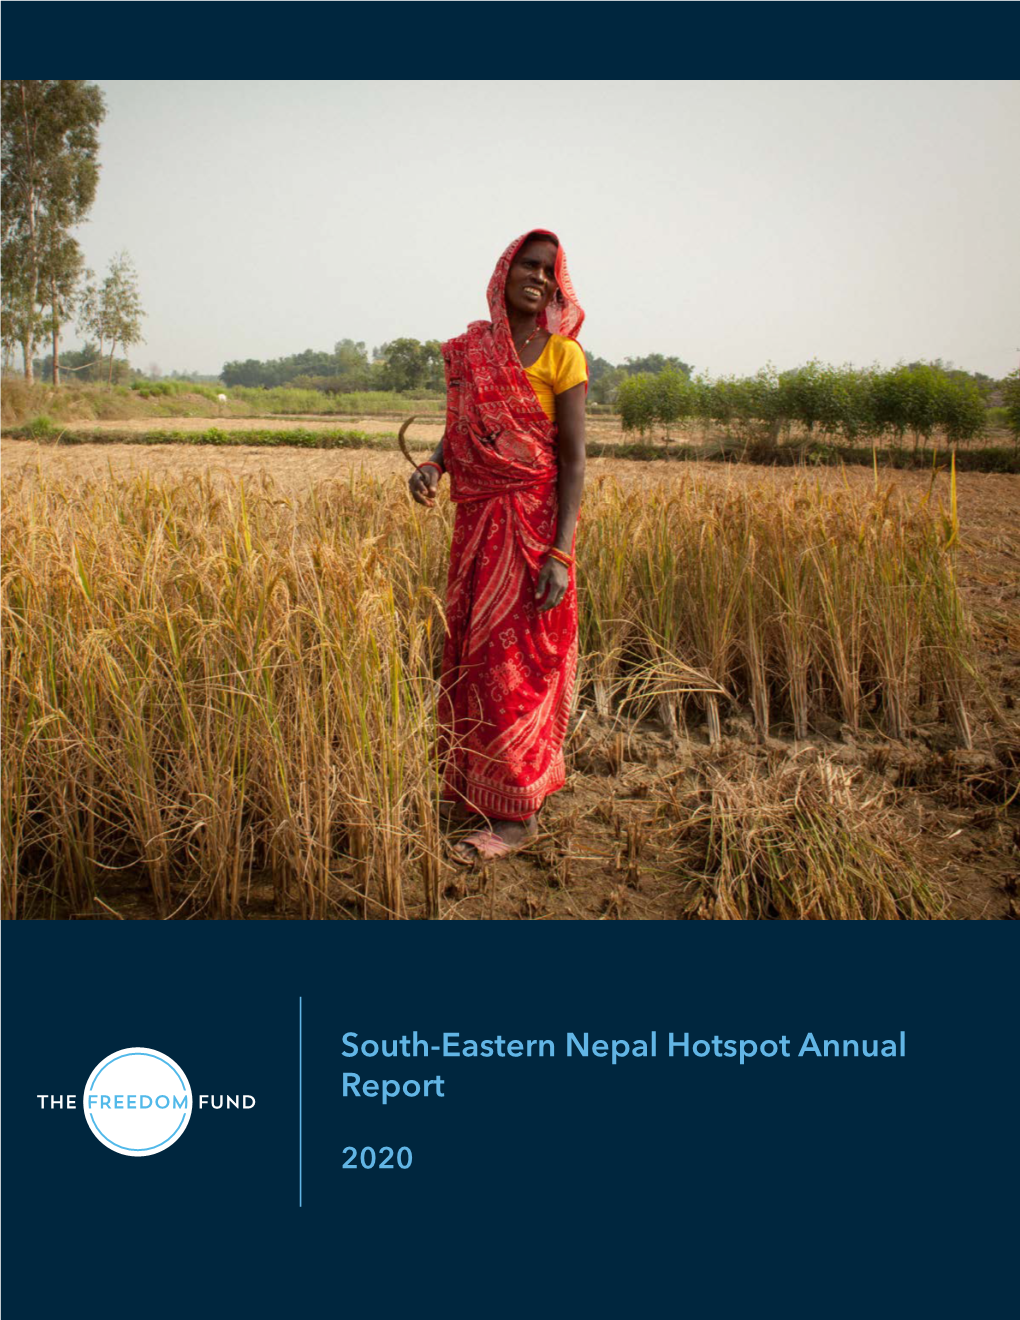 South-Eastern Nepal Hotspot 2020 Annual Report